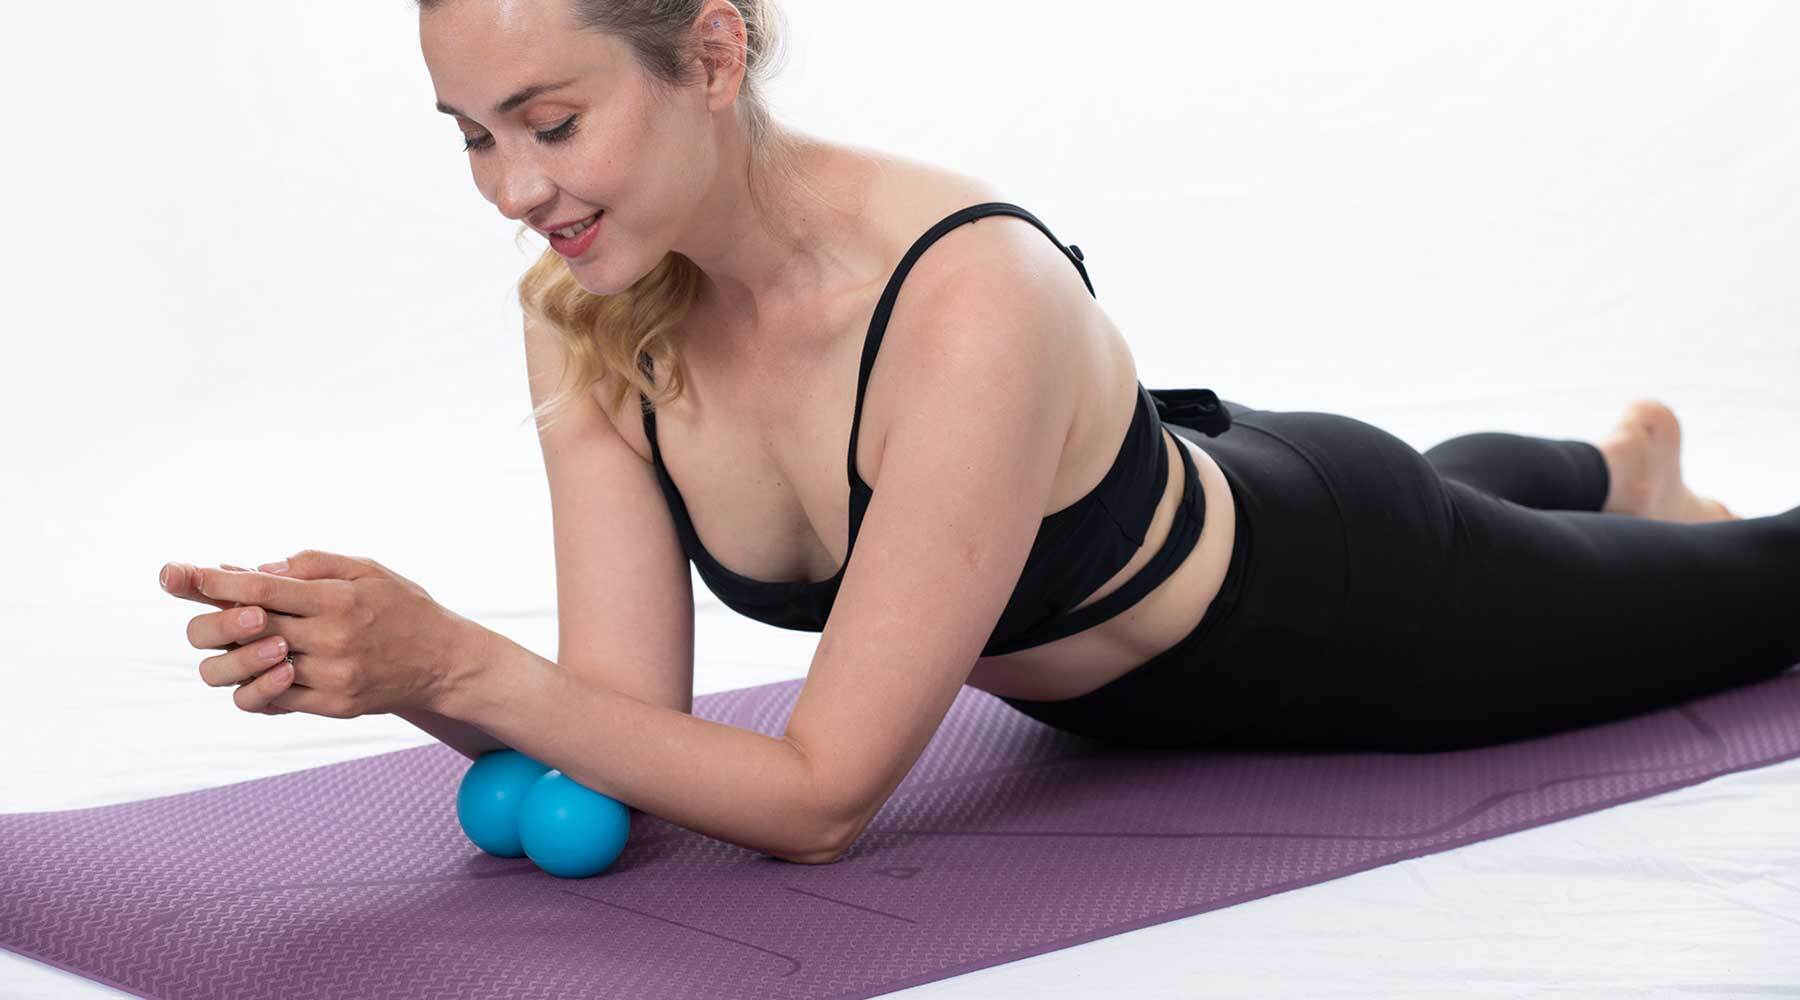 How To Use Self-Massage Therapy Balls Effectively